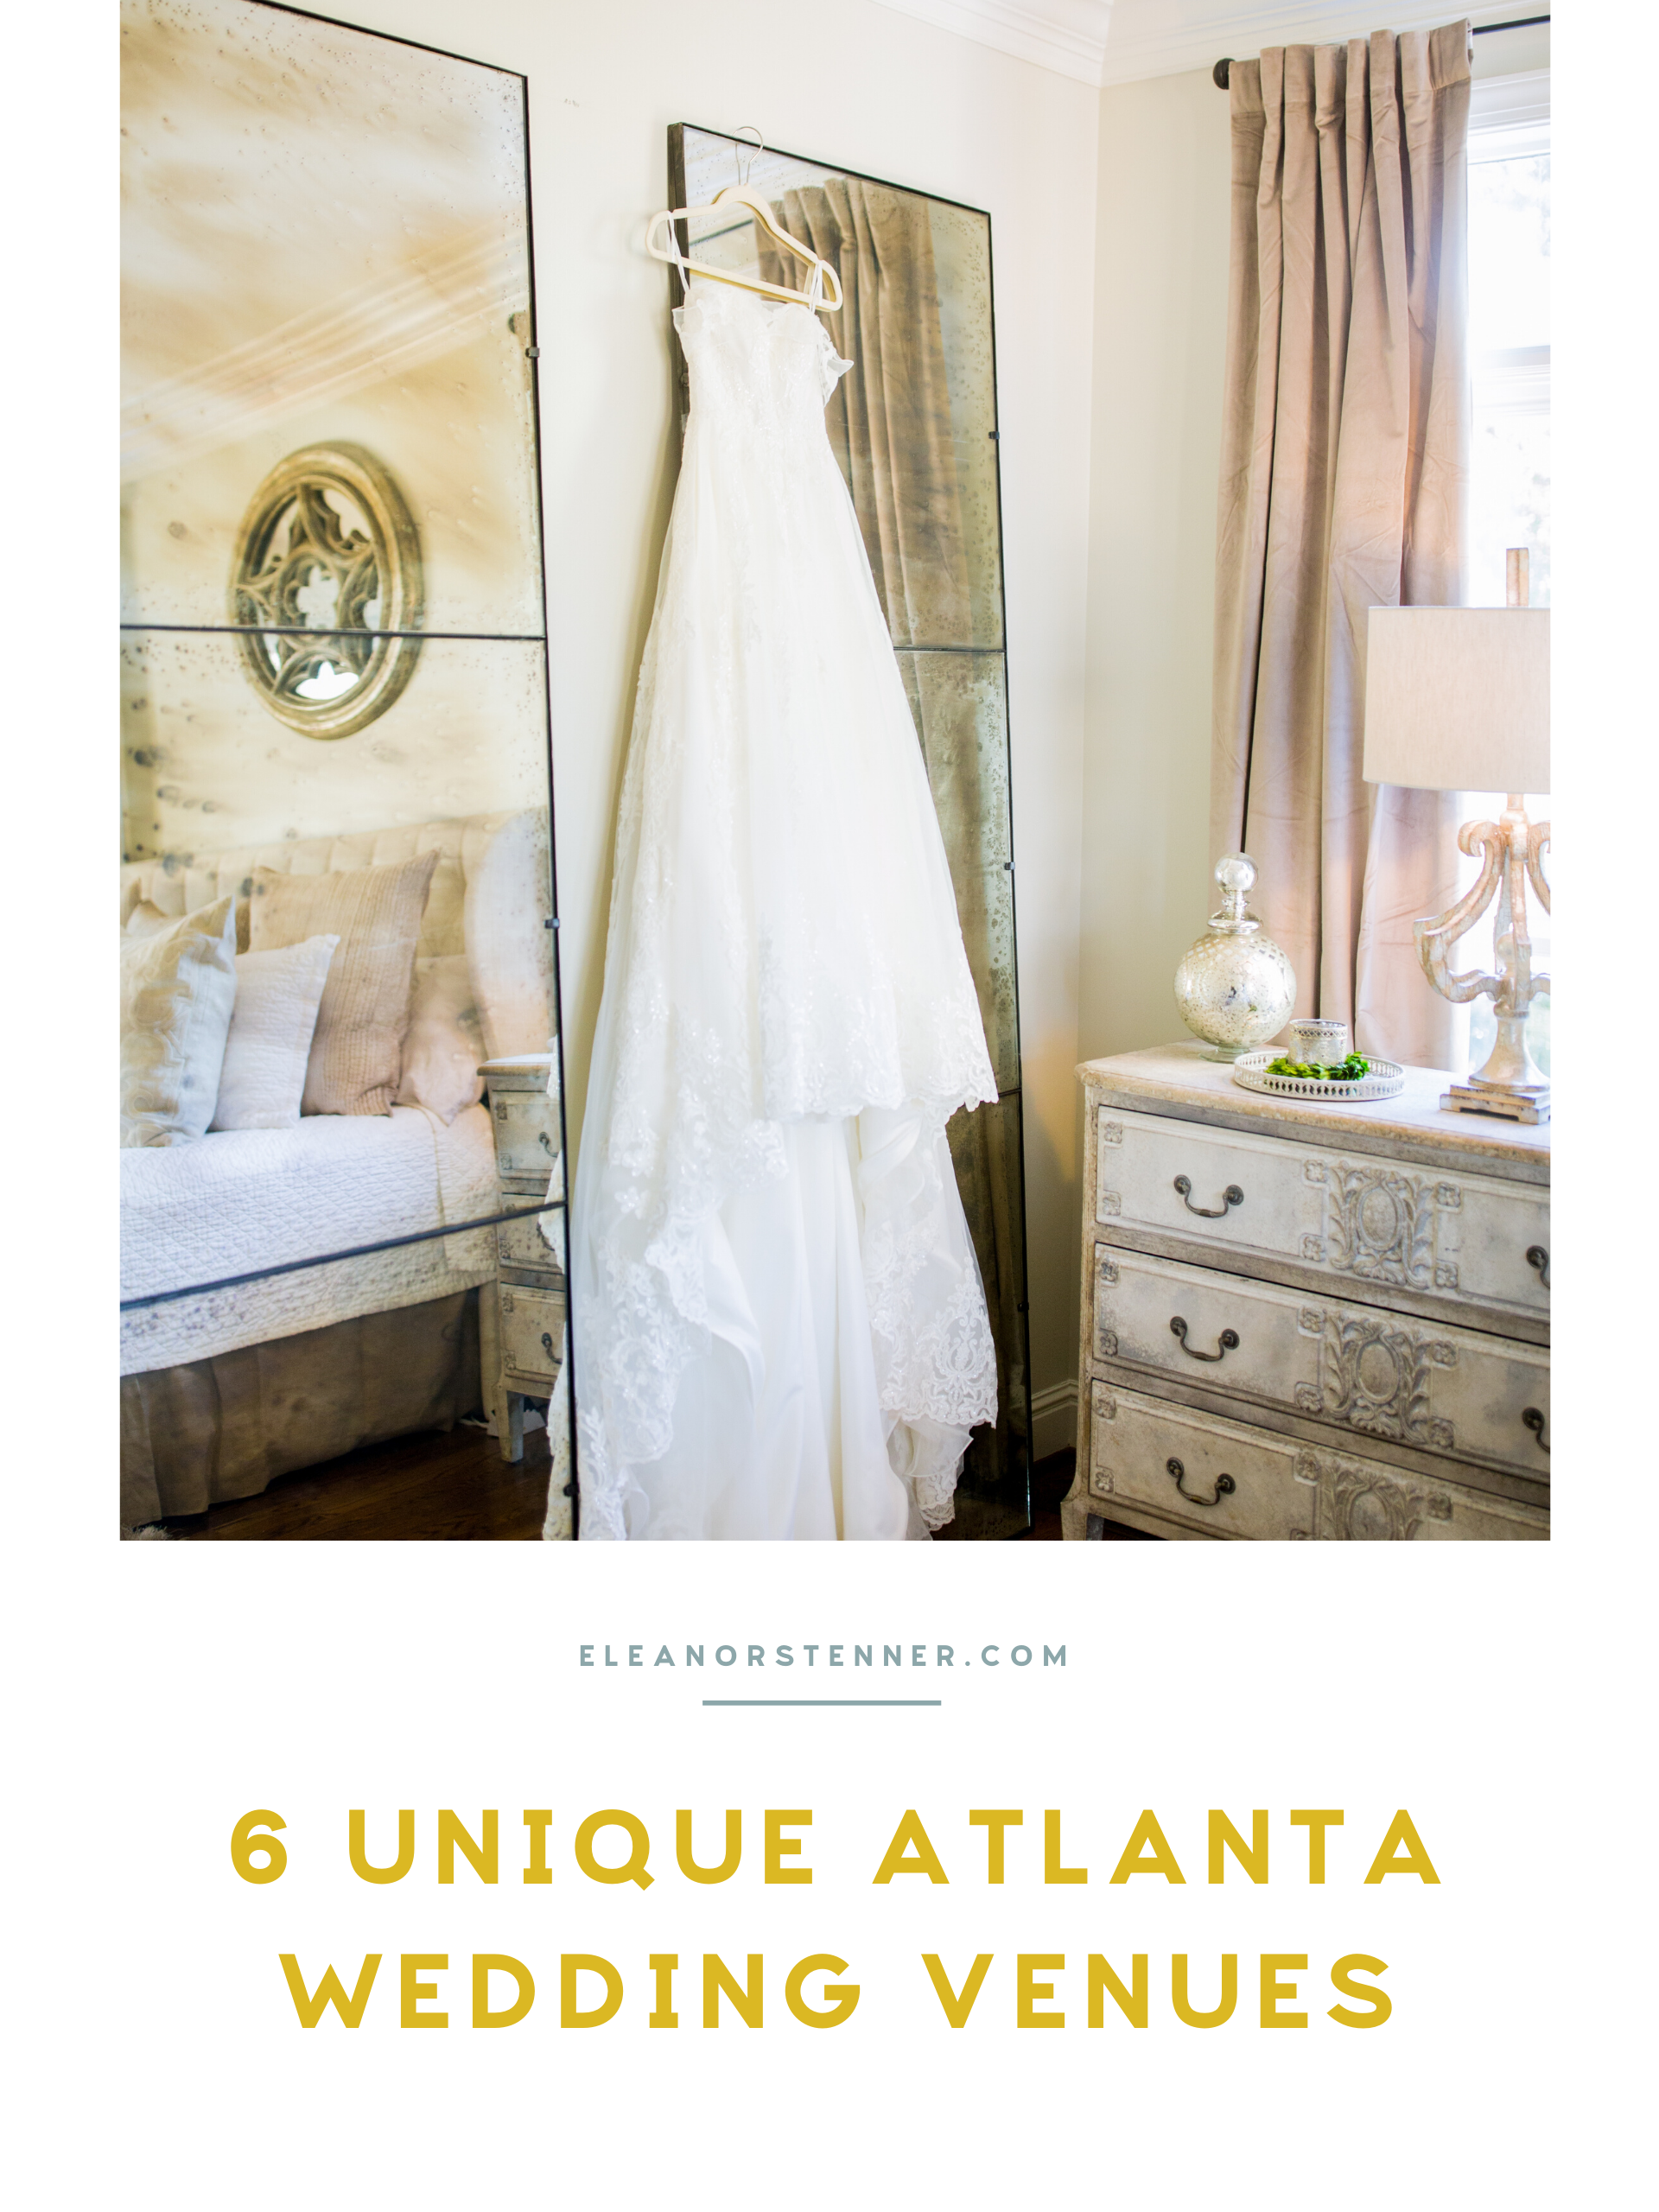 Looking for a wedding venue in Atlanta that fits all your needs, while still being fun and trendy? Here are 6 unique downtown wedding venues.